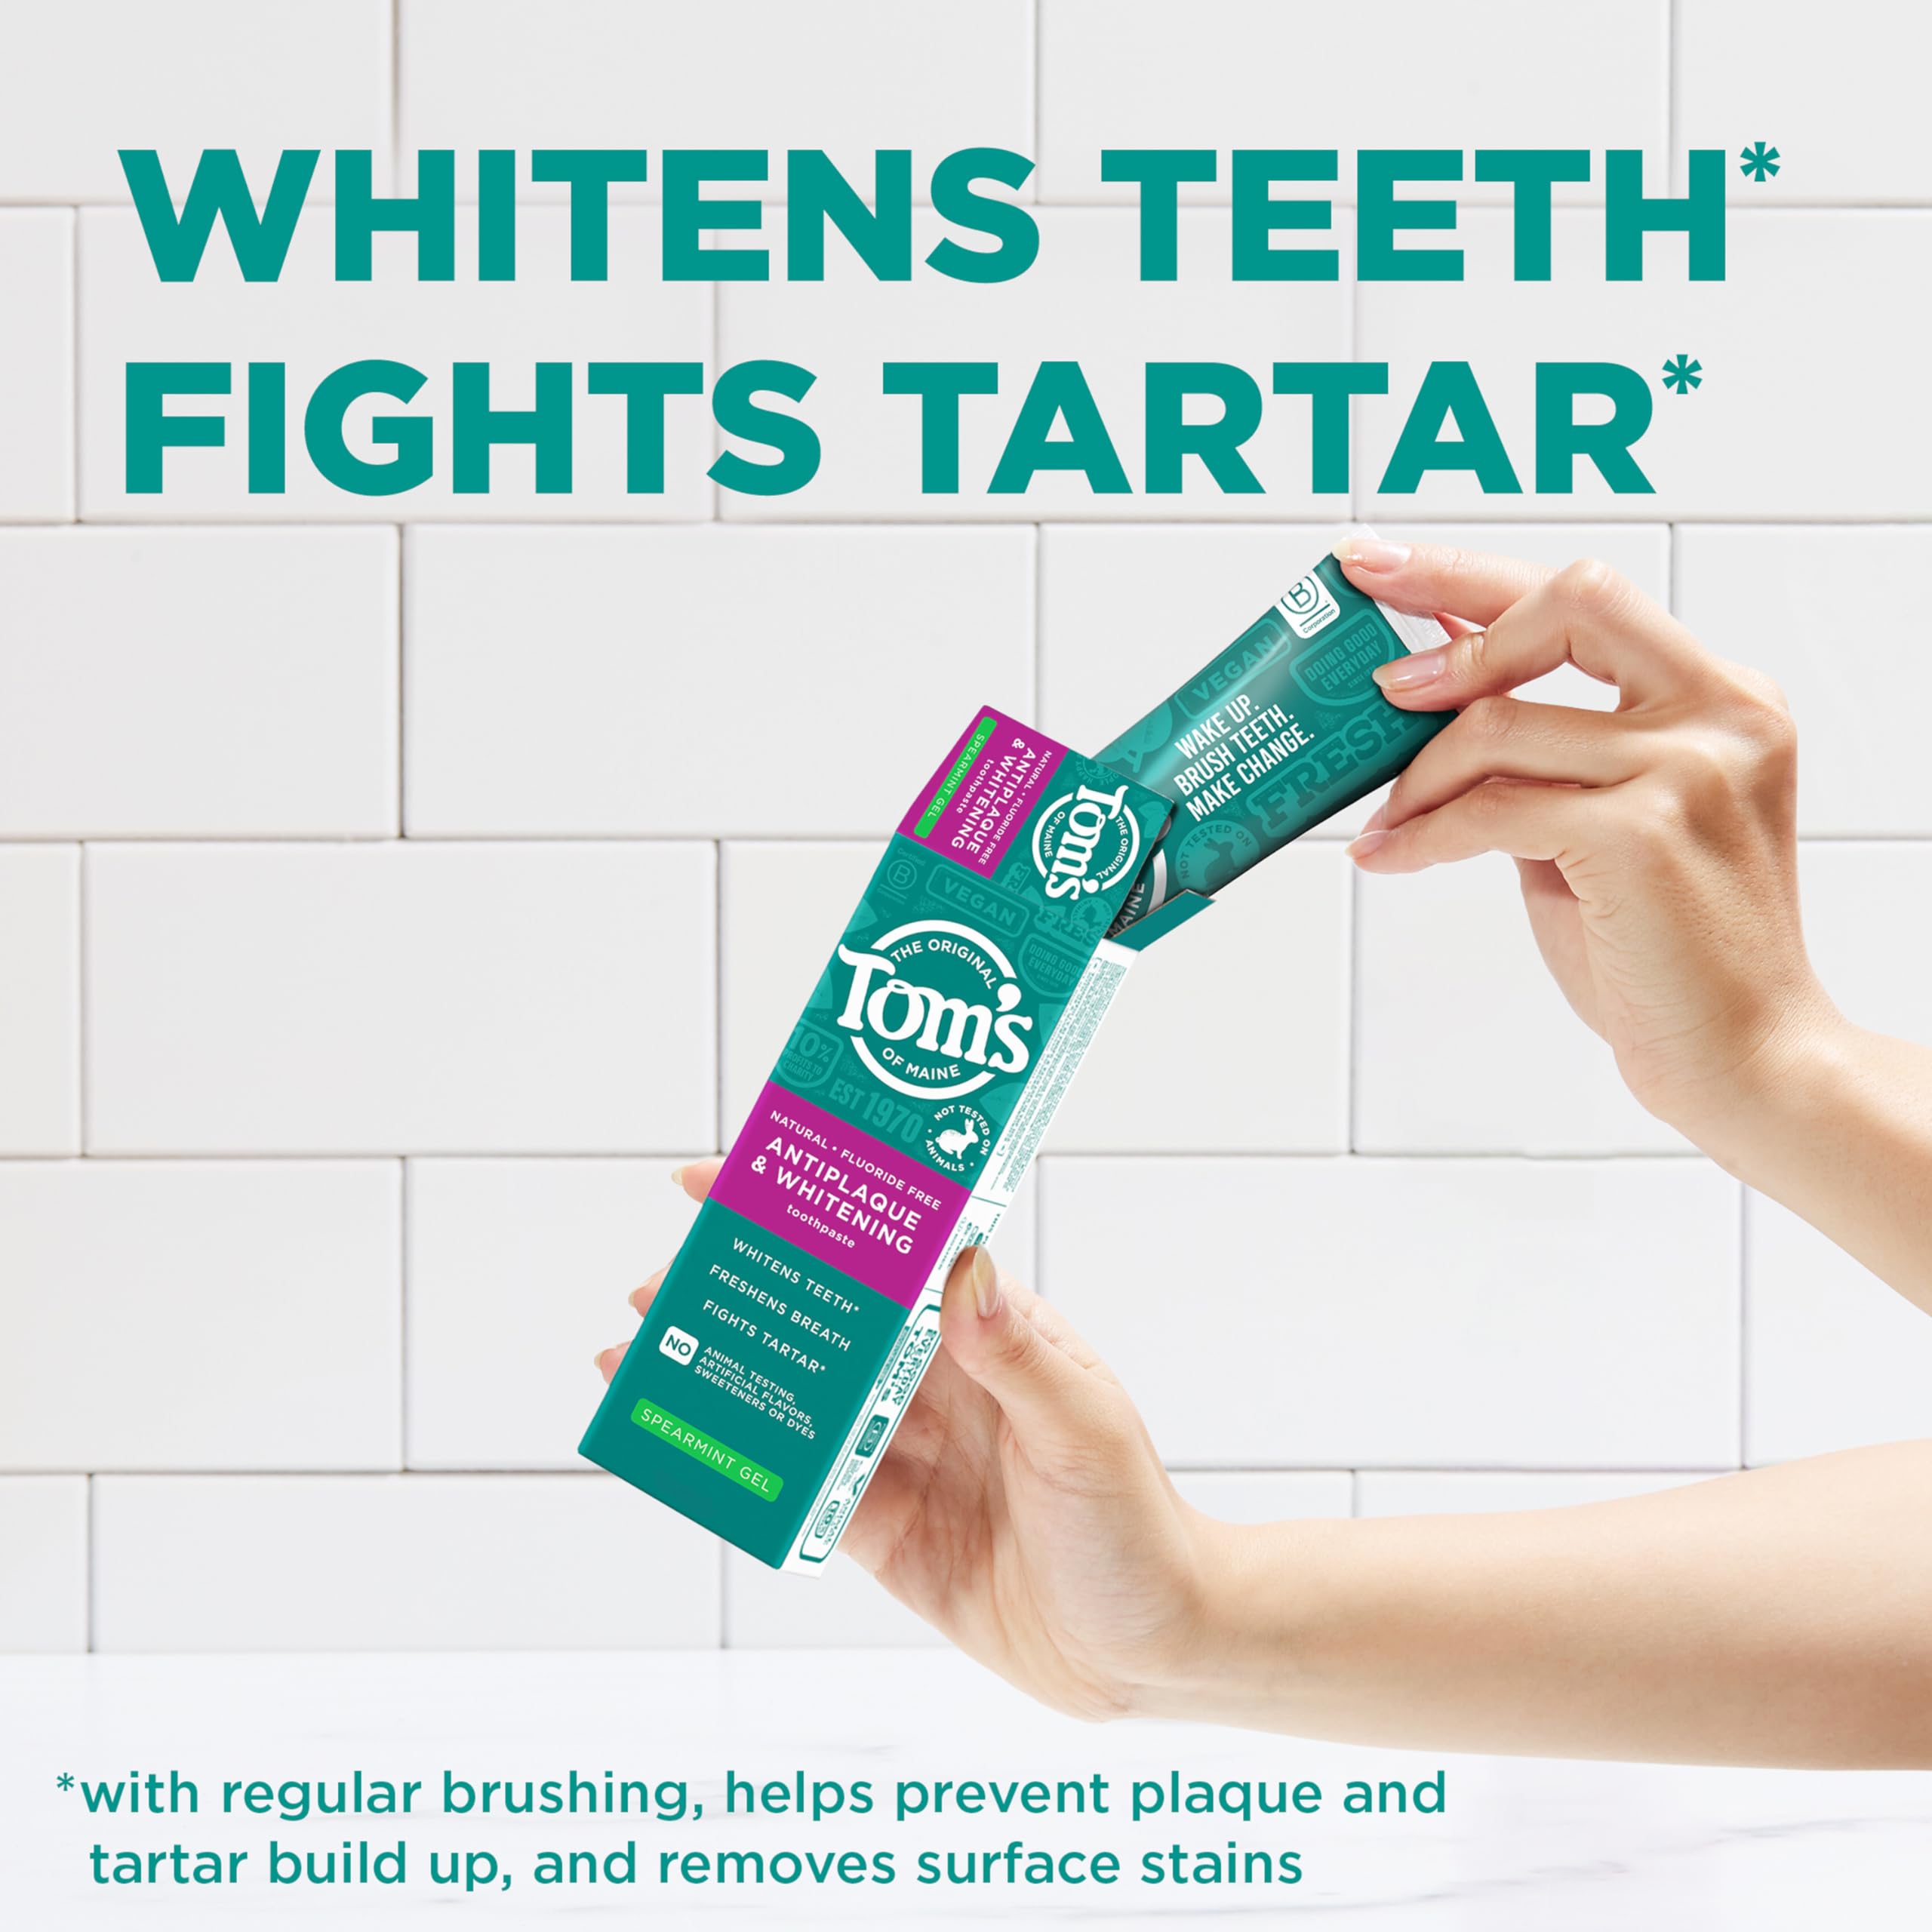 Tom’s of Maine Antiplaque and Whitening Fluoride Free Toothpaste Gel, Spearmint, 3 Pack, 4.0 oz